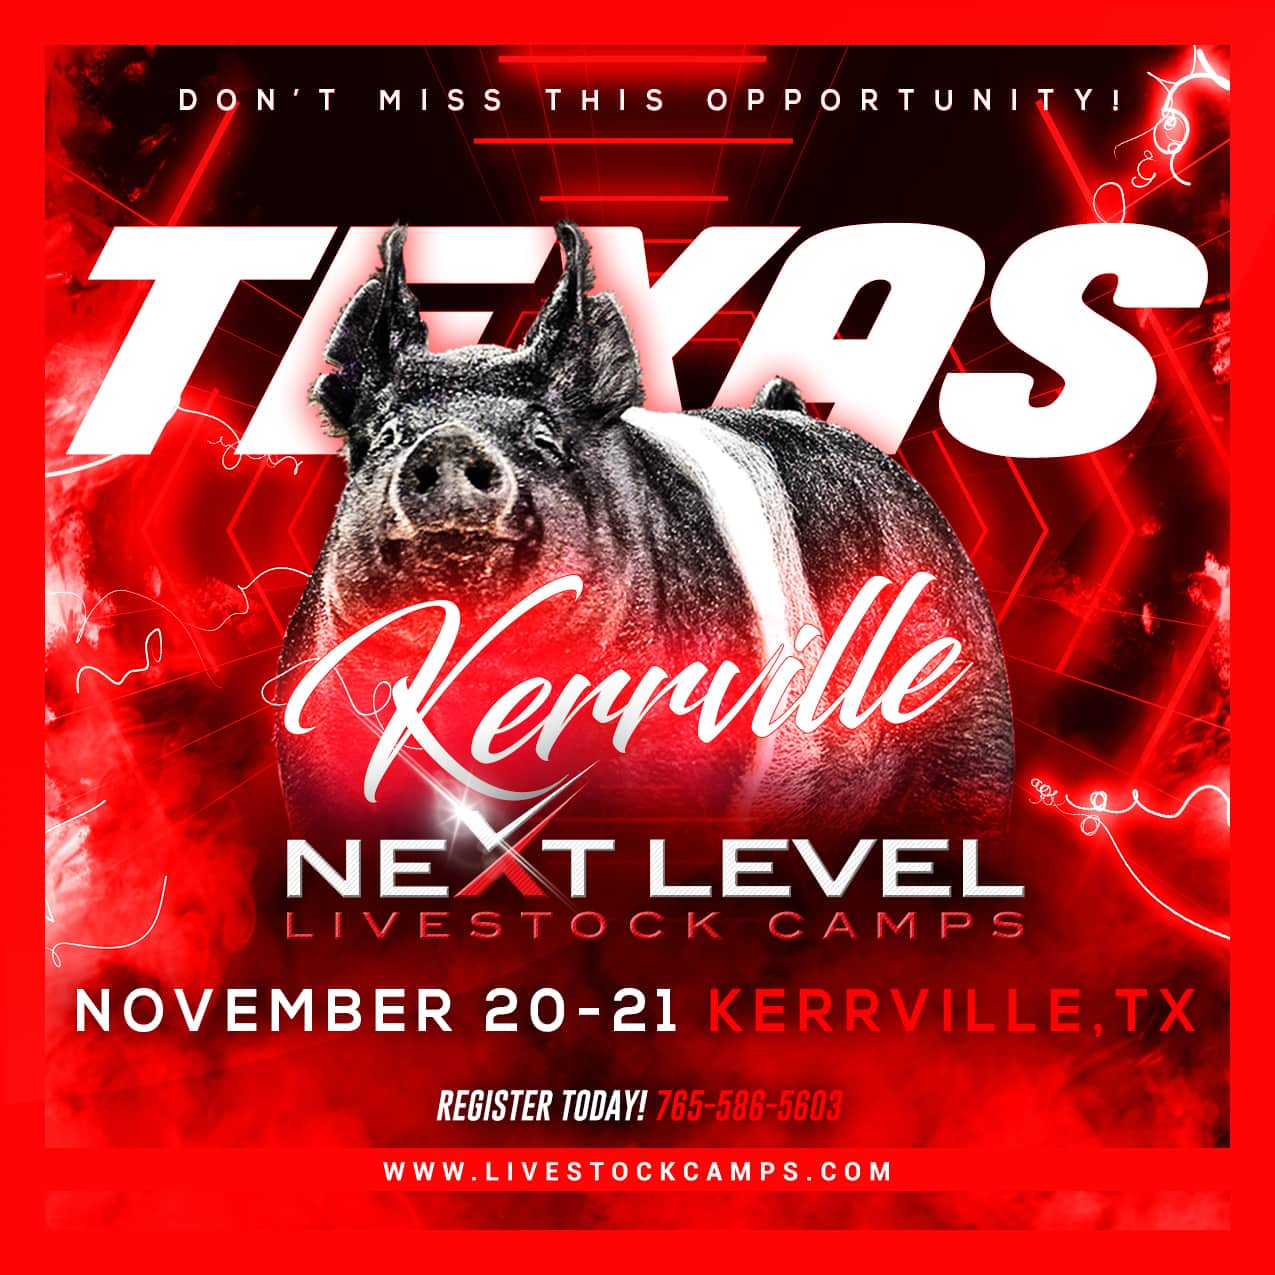 Next Level Livestock Camps coming to Kerrville, Texas November 20-21